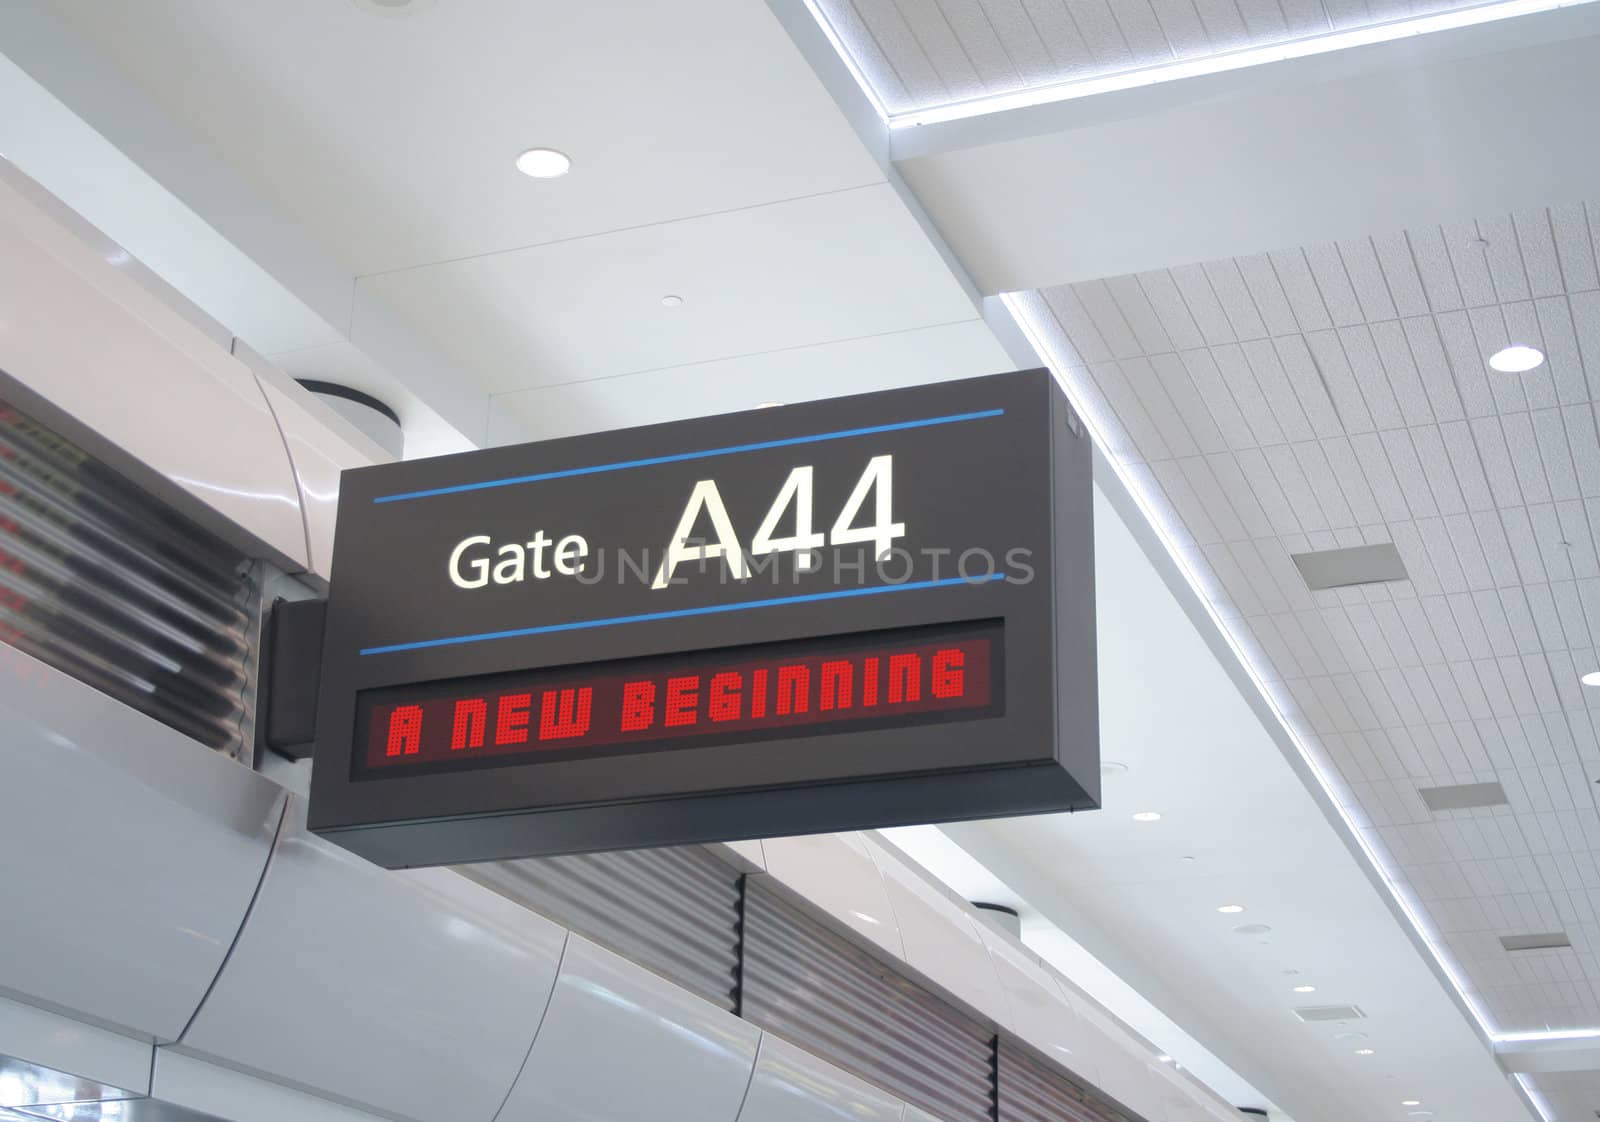 Gate sign with destination read out